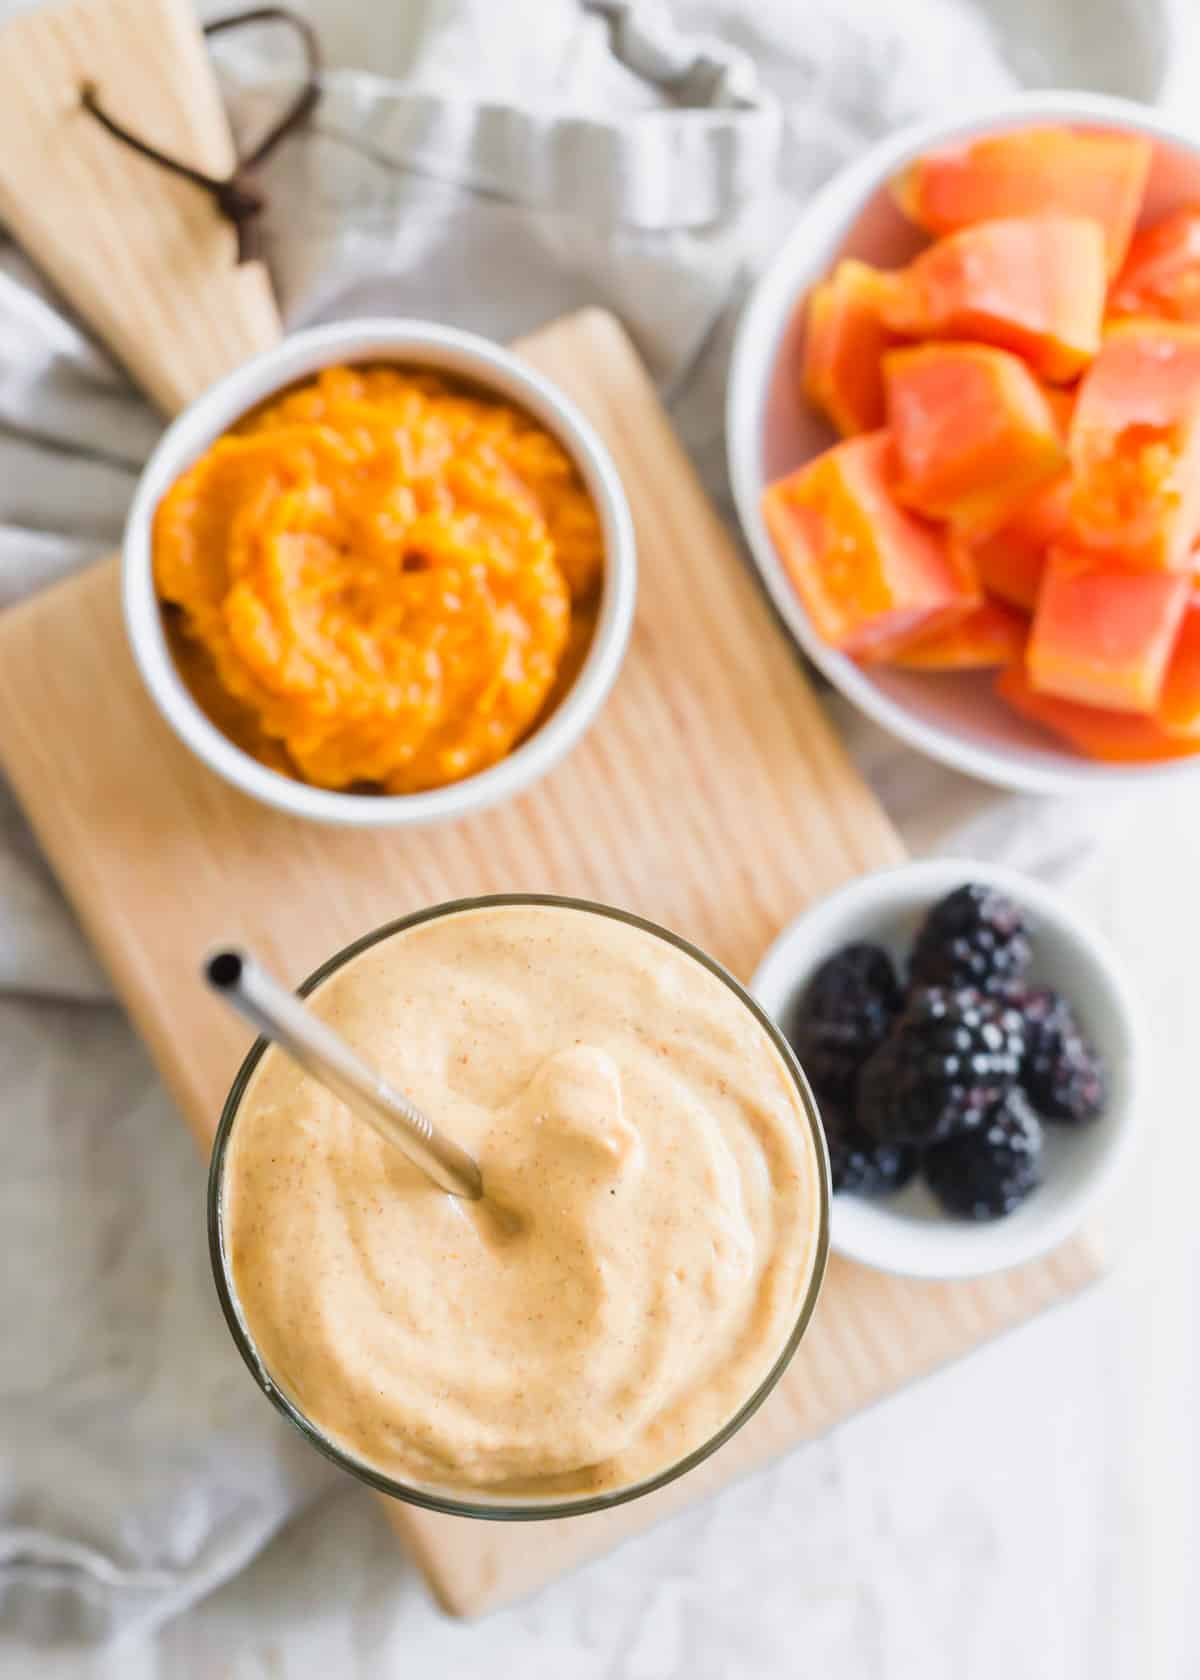 Nutrient-rich and digestive friendly papaya smoothie to help heal and promote good gut health.